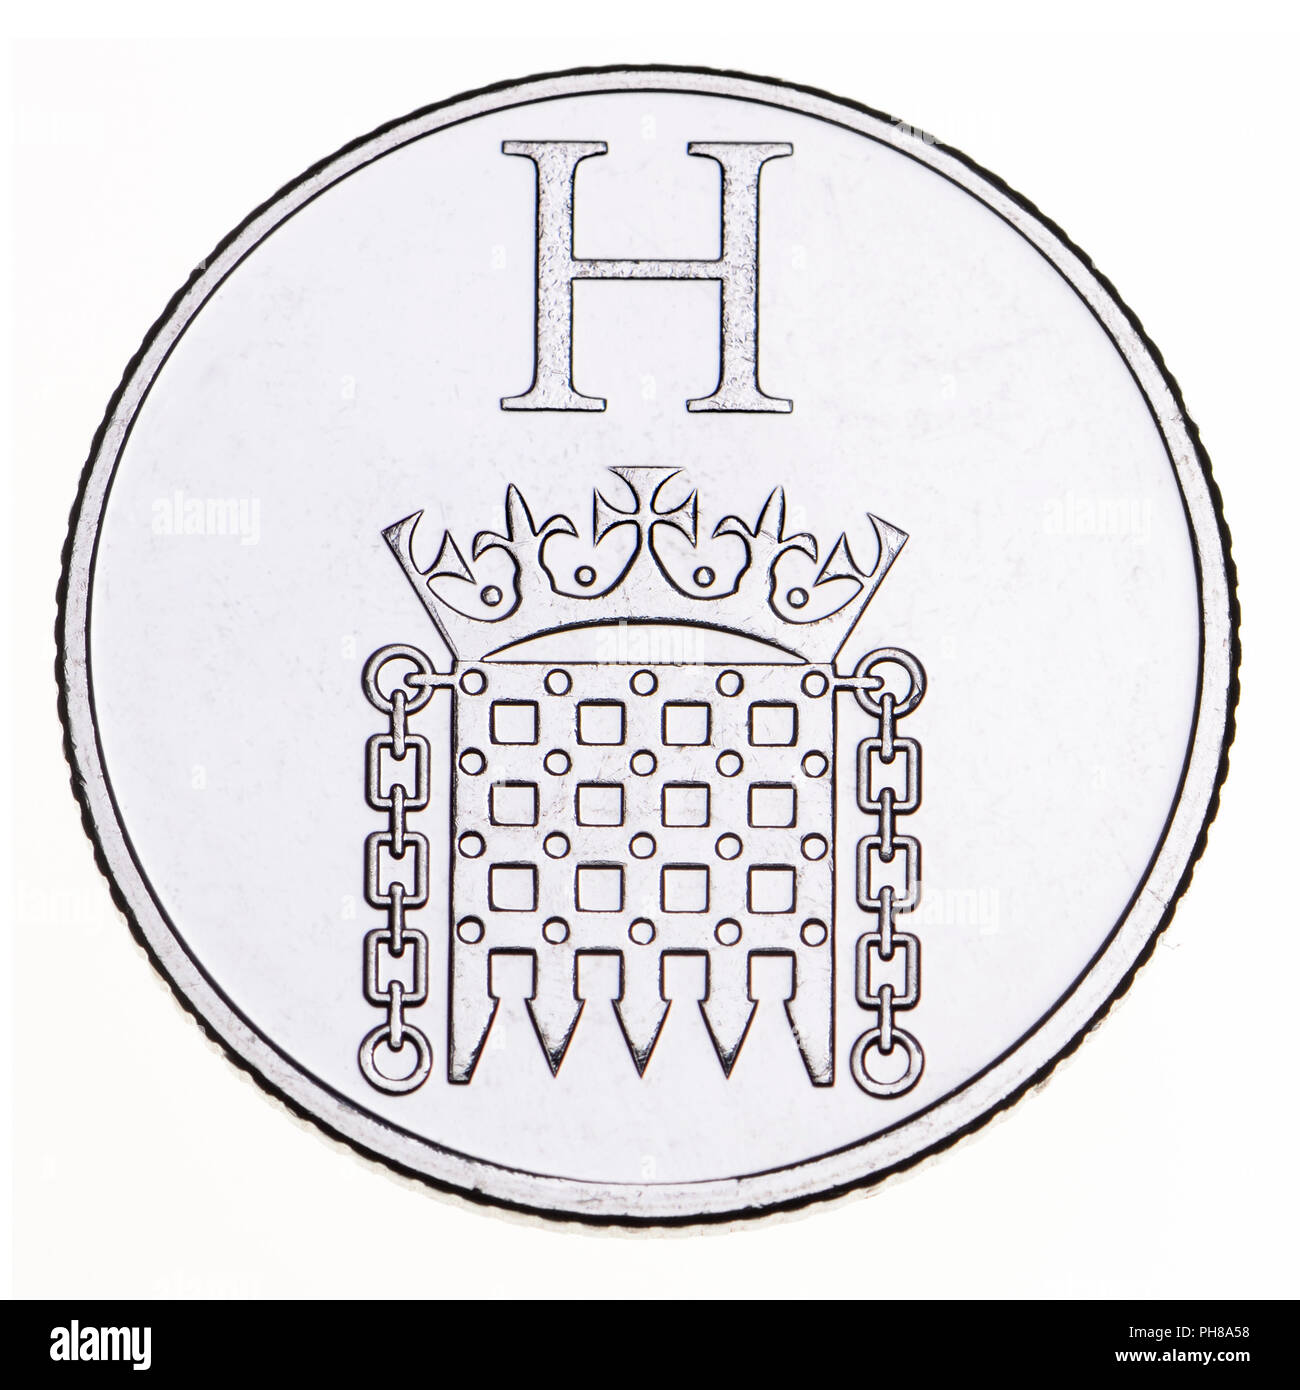 British 10p coin (reverse) from 2018 'Alphabet' series, celebrating Britishness. H - Houses of Parliament Stock Photo